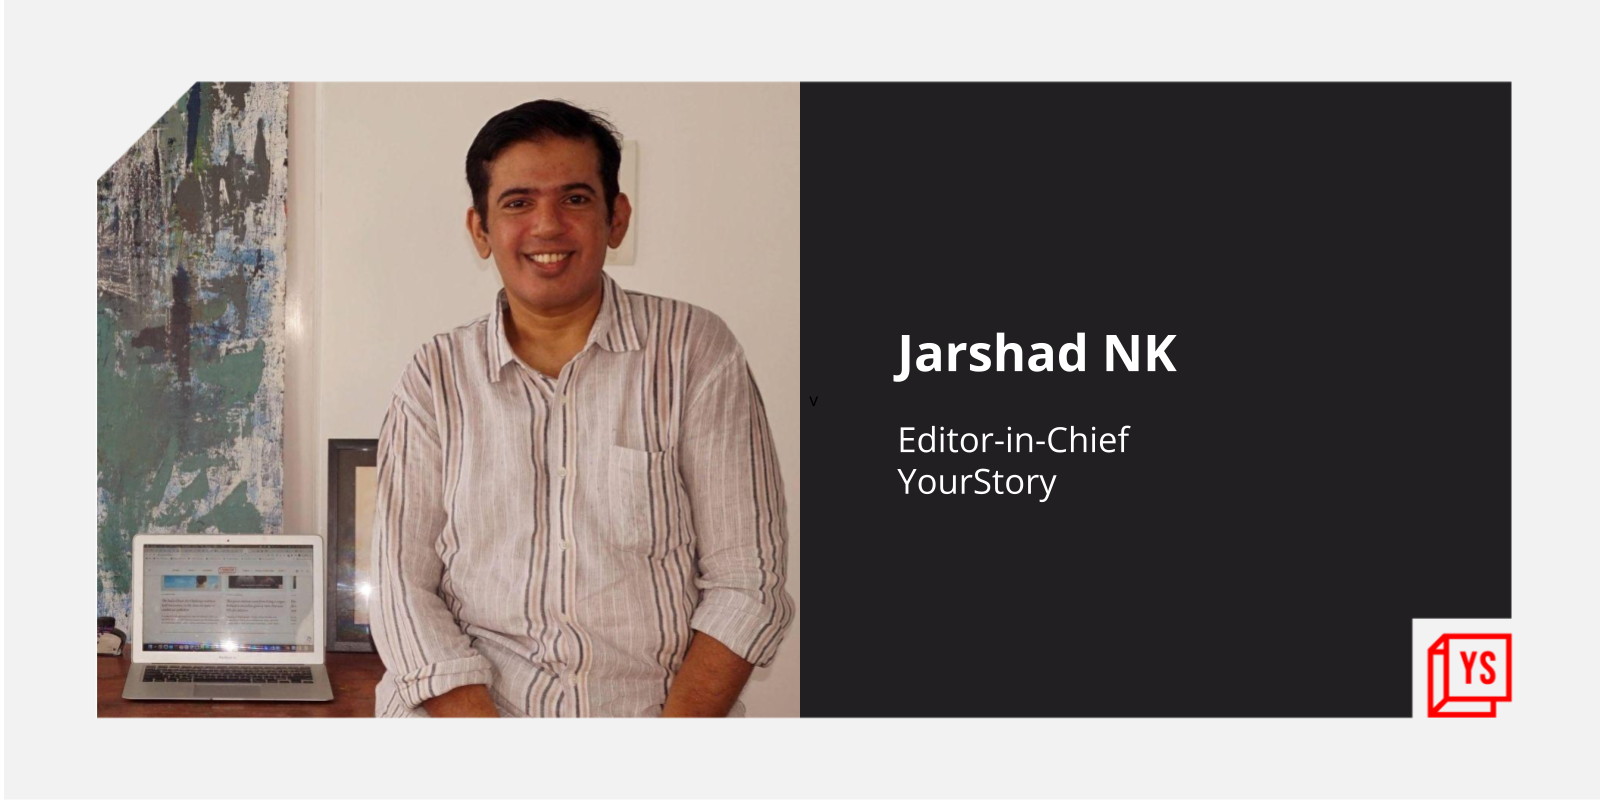 New beginnings: Jarshad NK to join as YourStory's Editor-in-Chief